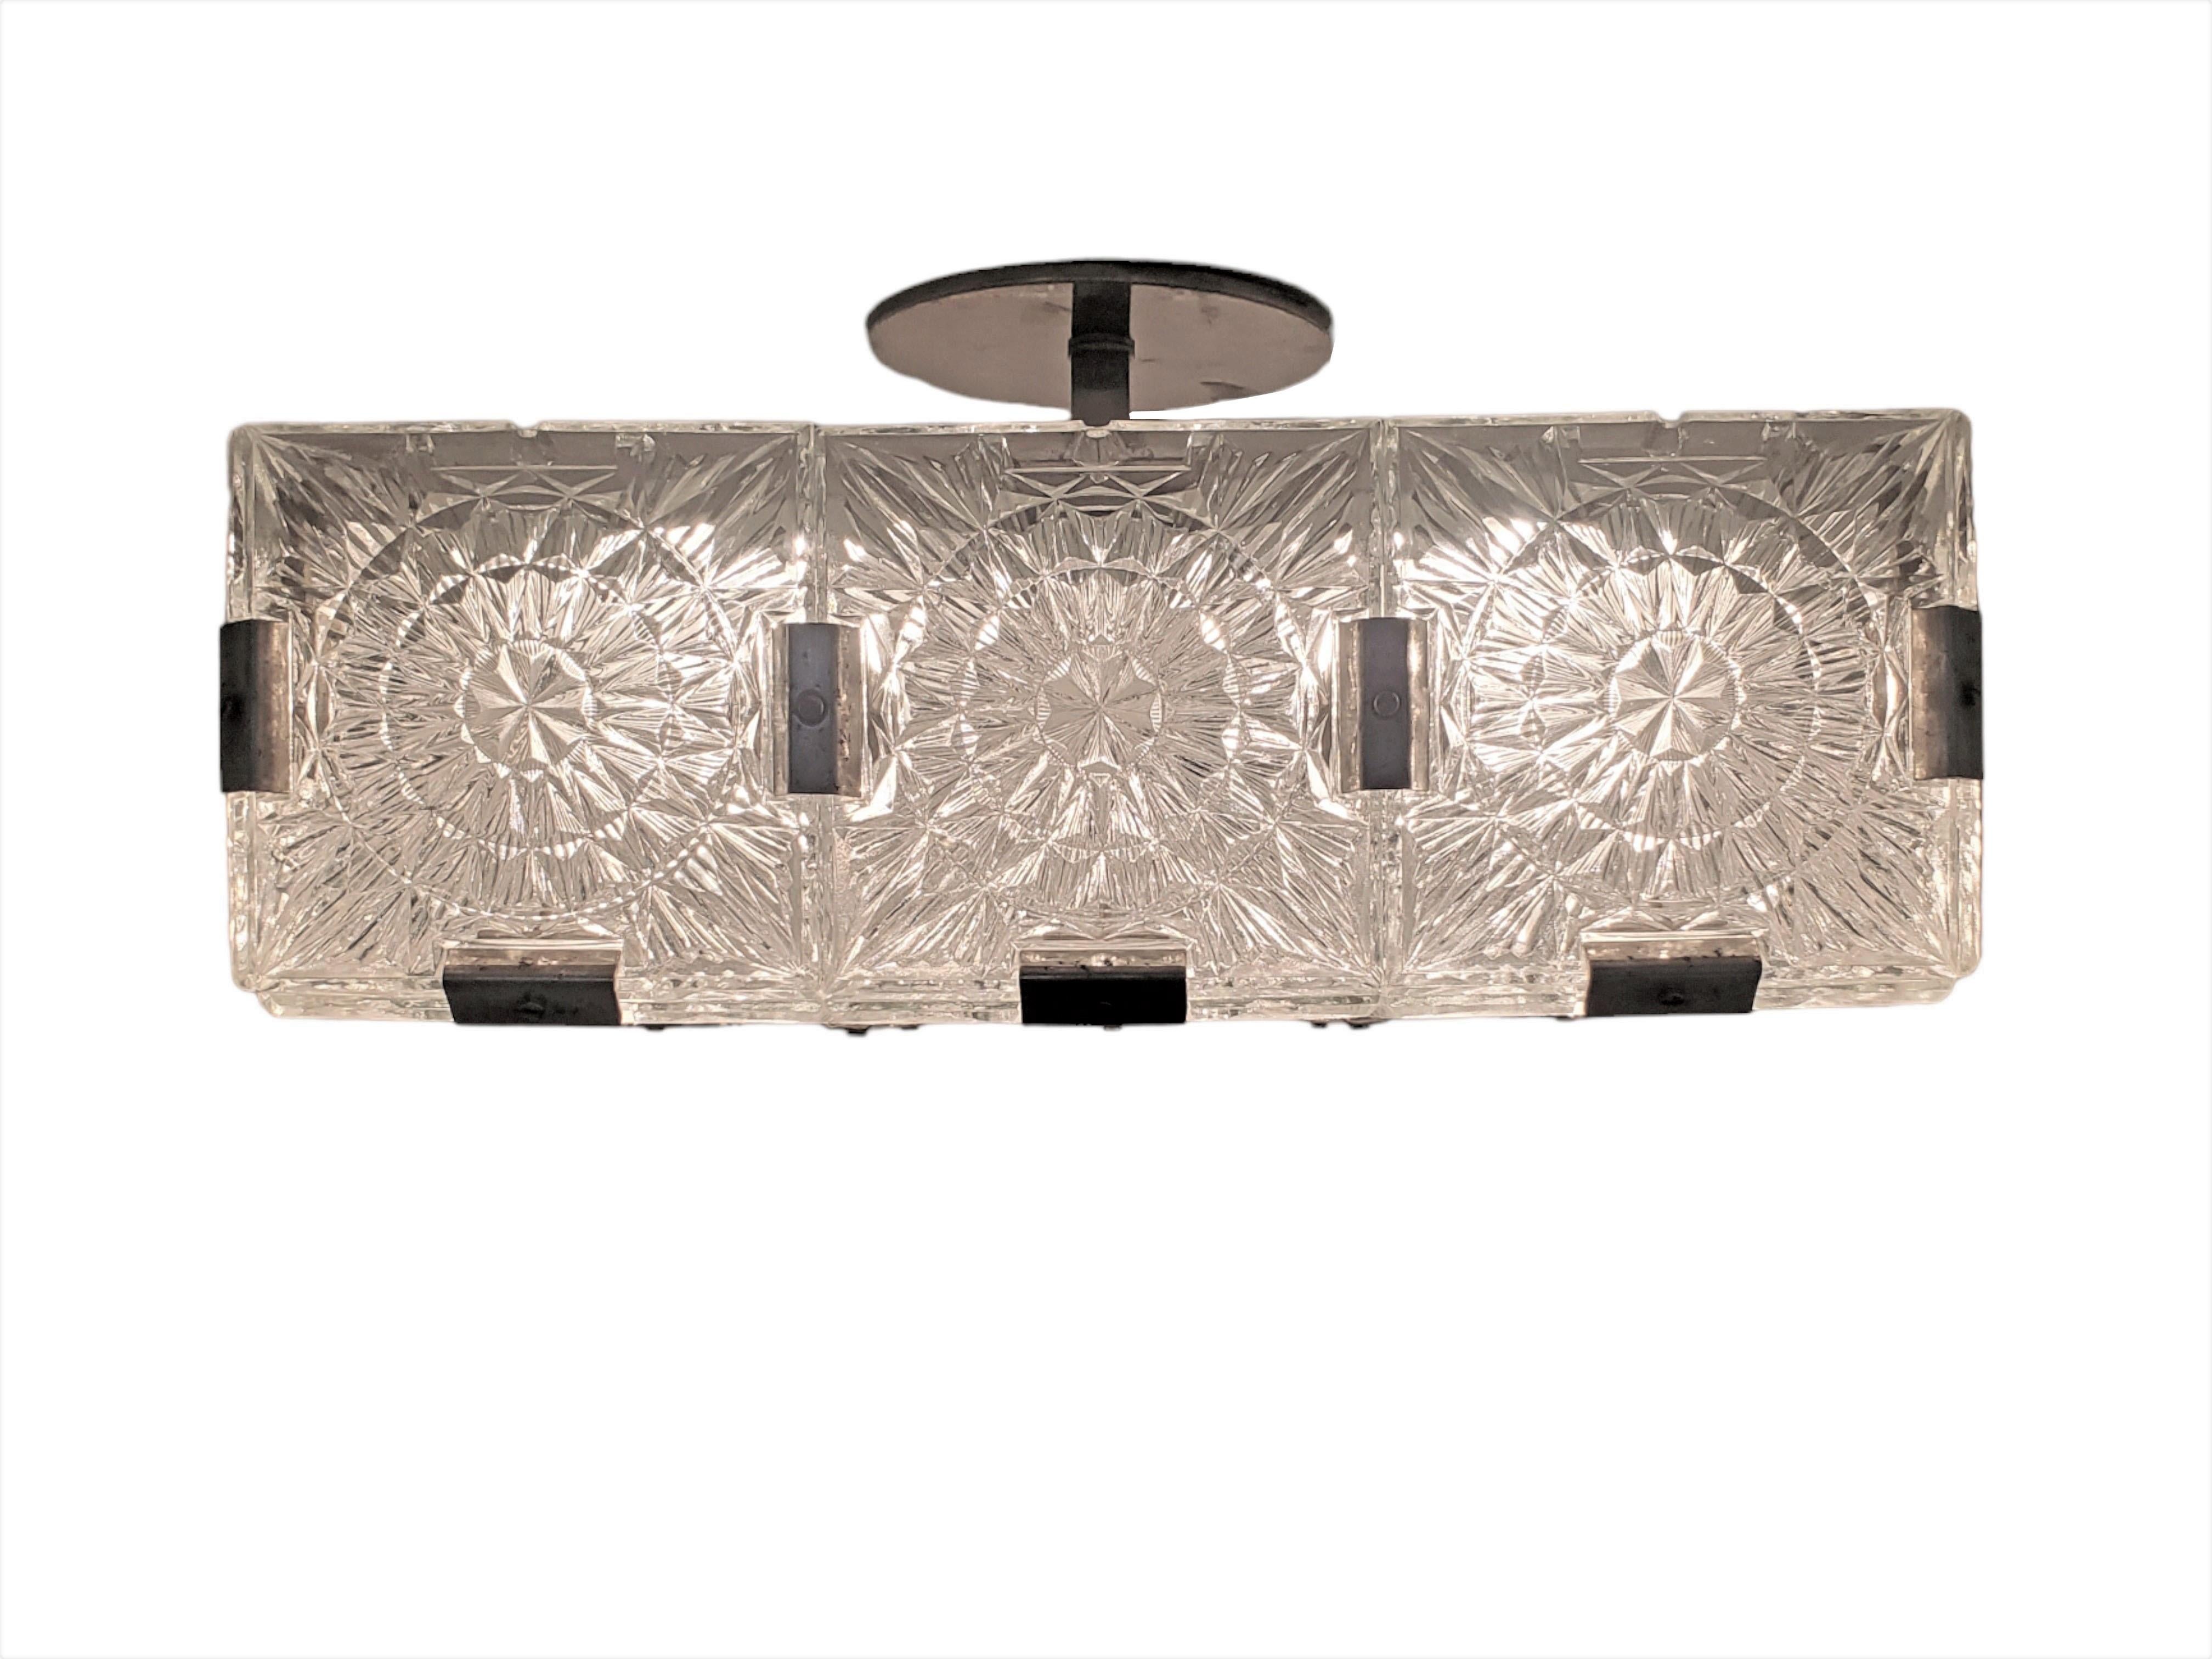 One of several Mid-Century Modern semi- flush mounted ceiling squares.
Patterns of geometric and stylized floral motif decorate this lovely architecturally square chandelier in a gridwork of square glass panels structurally and decoratively